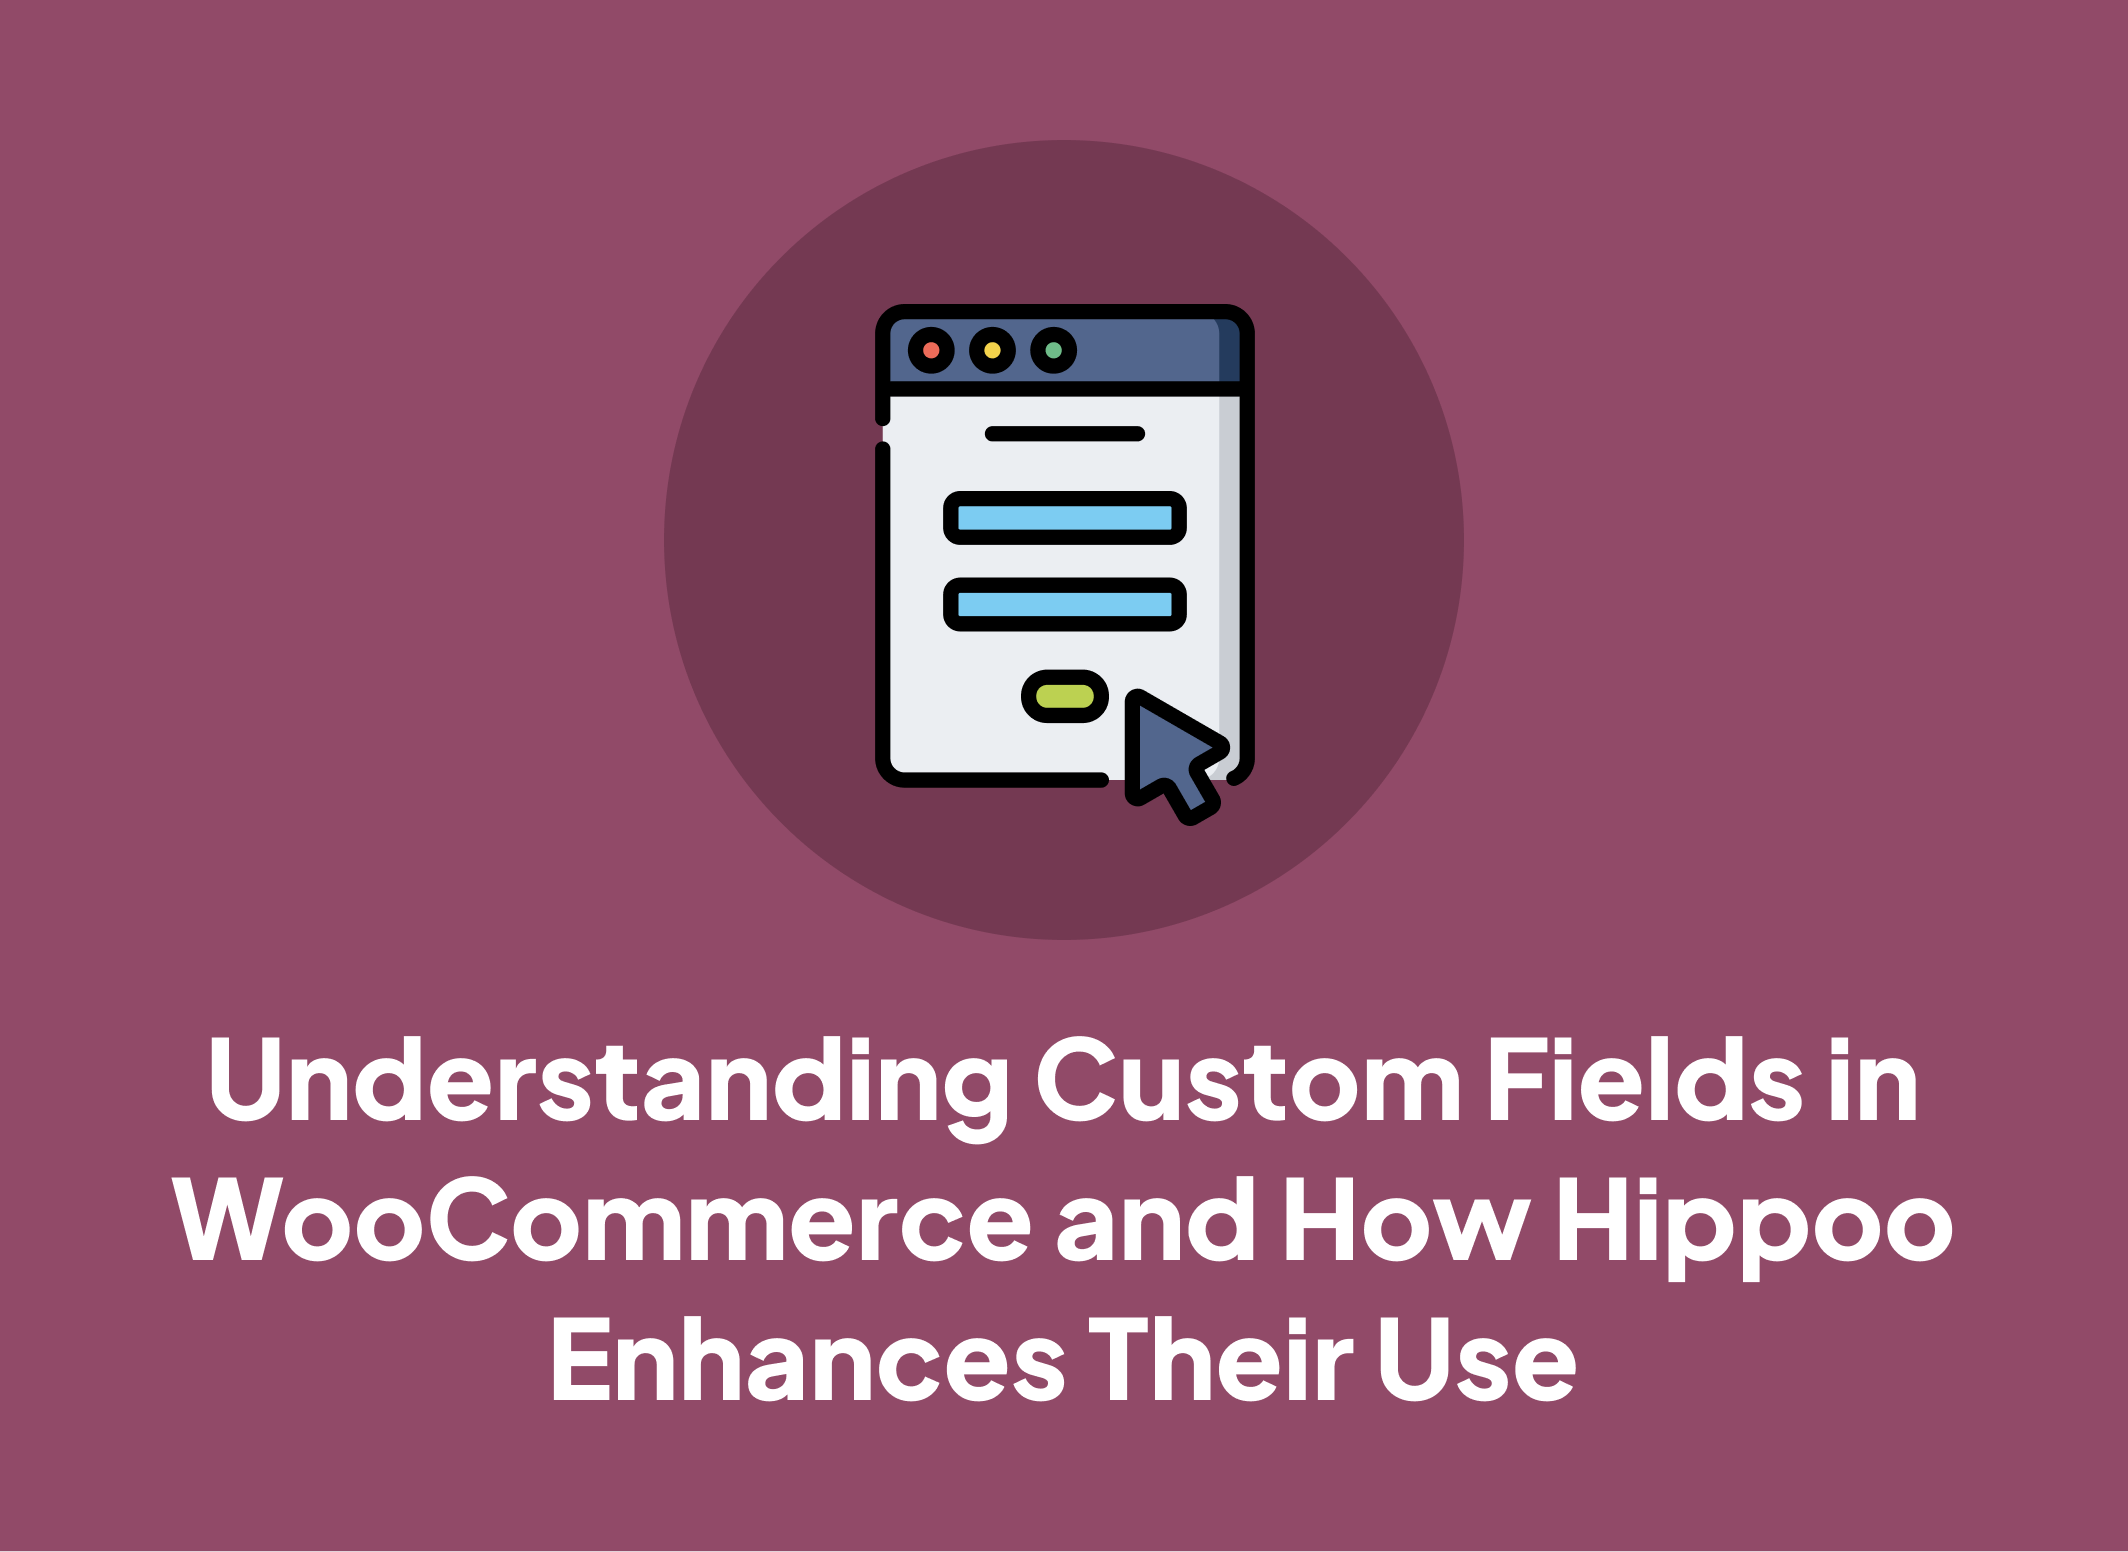 Understanding Custom Fields in WooCommerce and How Hippoo Enhances Their Use